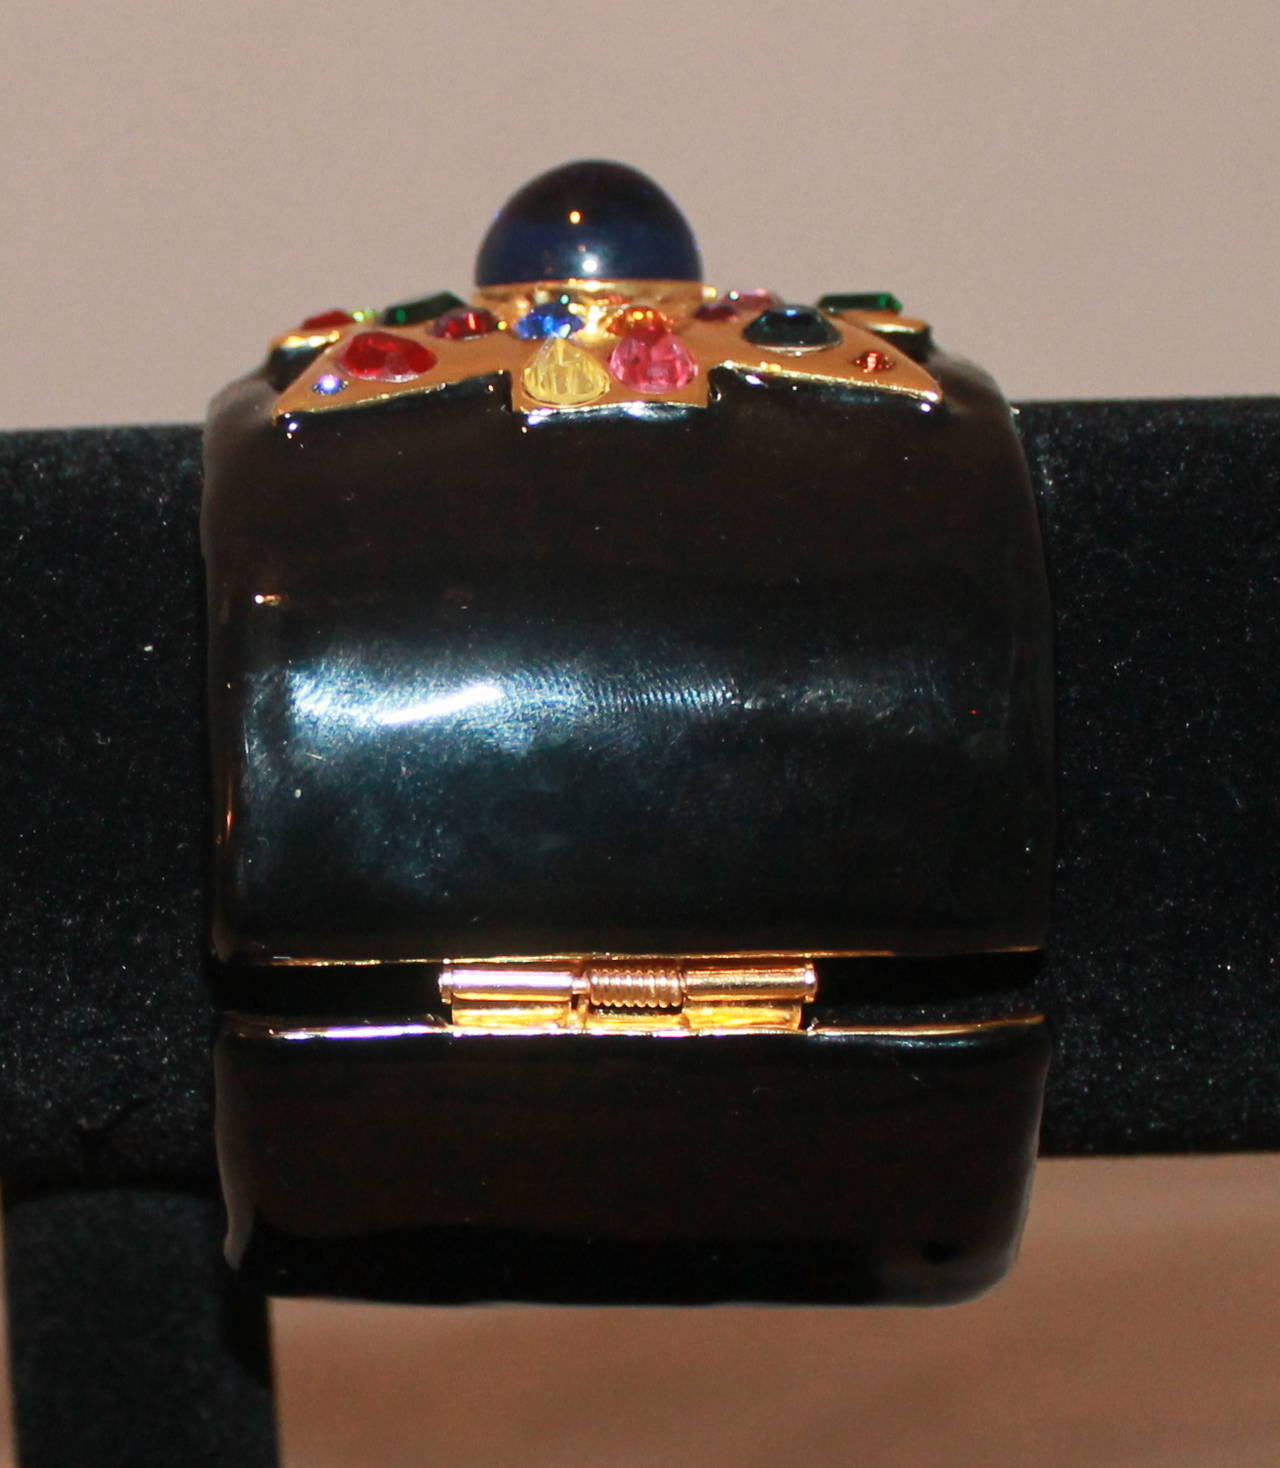 Kenneth Jay Lane Navy Multi Stone Pendant Cuff. This cuff is in fair condition with very light wear to the enamel and cuff, the only issue is that the tension is very loose on the adjustable area of the cuff. 

Width: 2